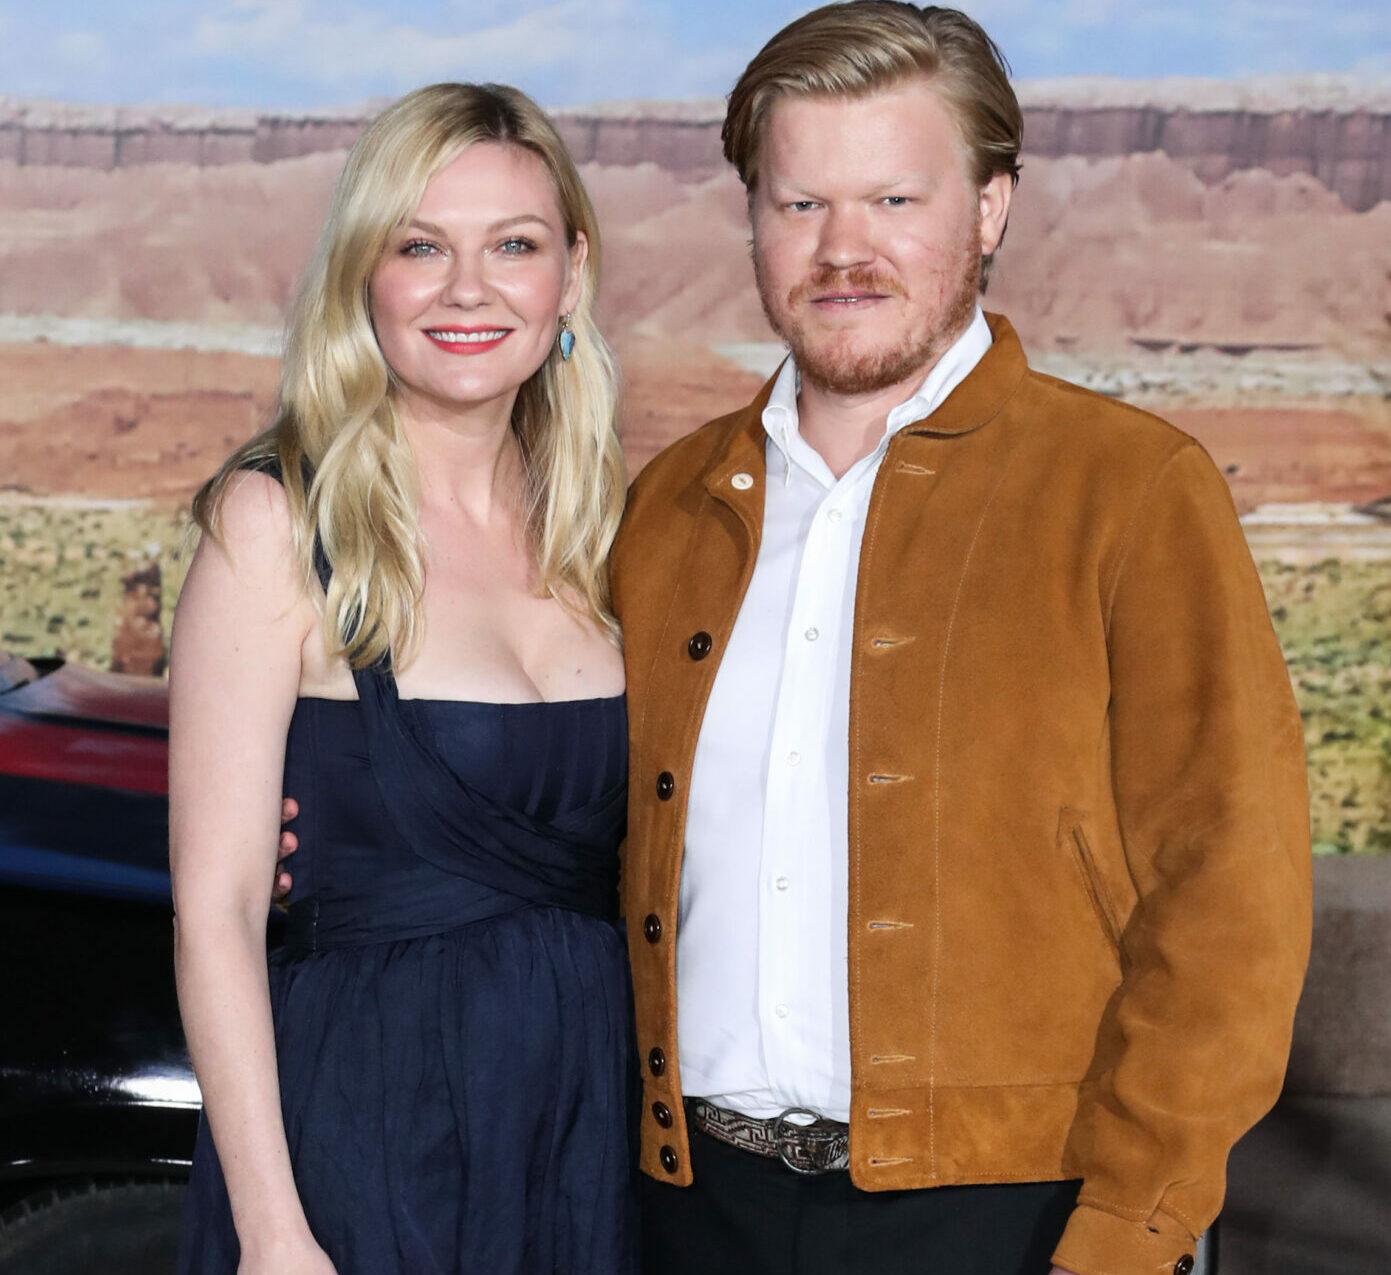 Los Angeles Premiere Of Netflix's 'El Camino: A Breaking Bad Movie' held at the Regency Village Theatre on October 7, 2019 in Westwood, Los Angeles, California, United States. 07 Oct 2019 Pictured: Kirsten Dunst, Jesse Plemons.